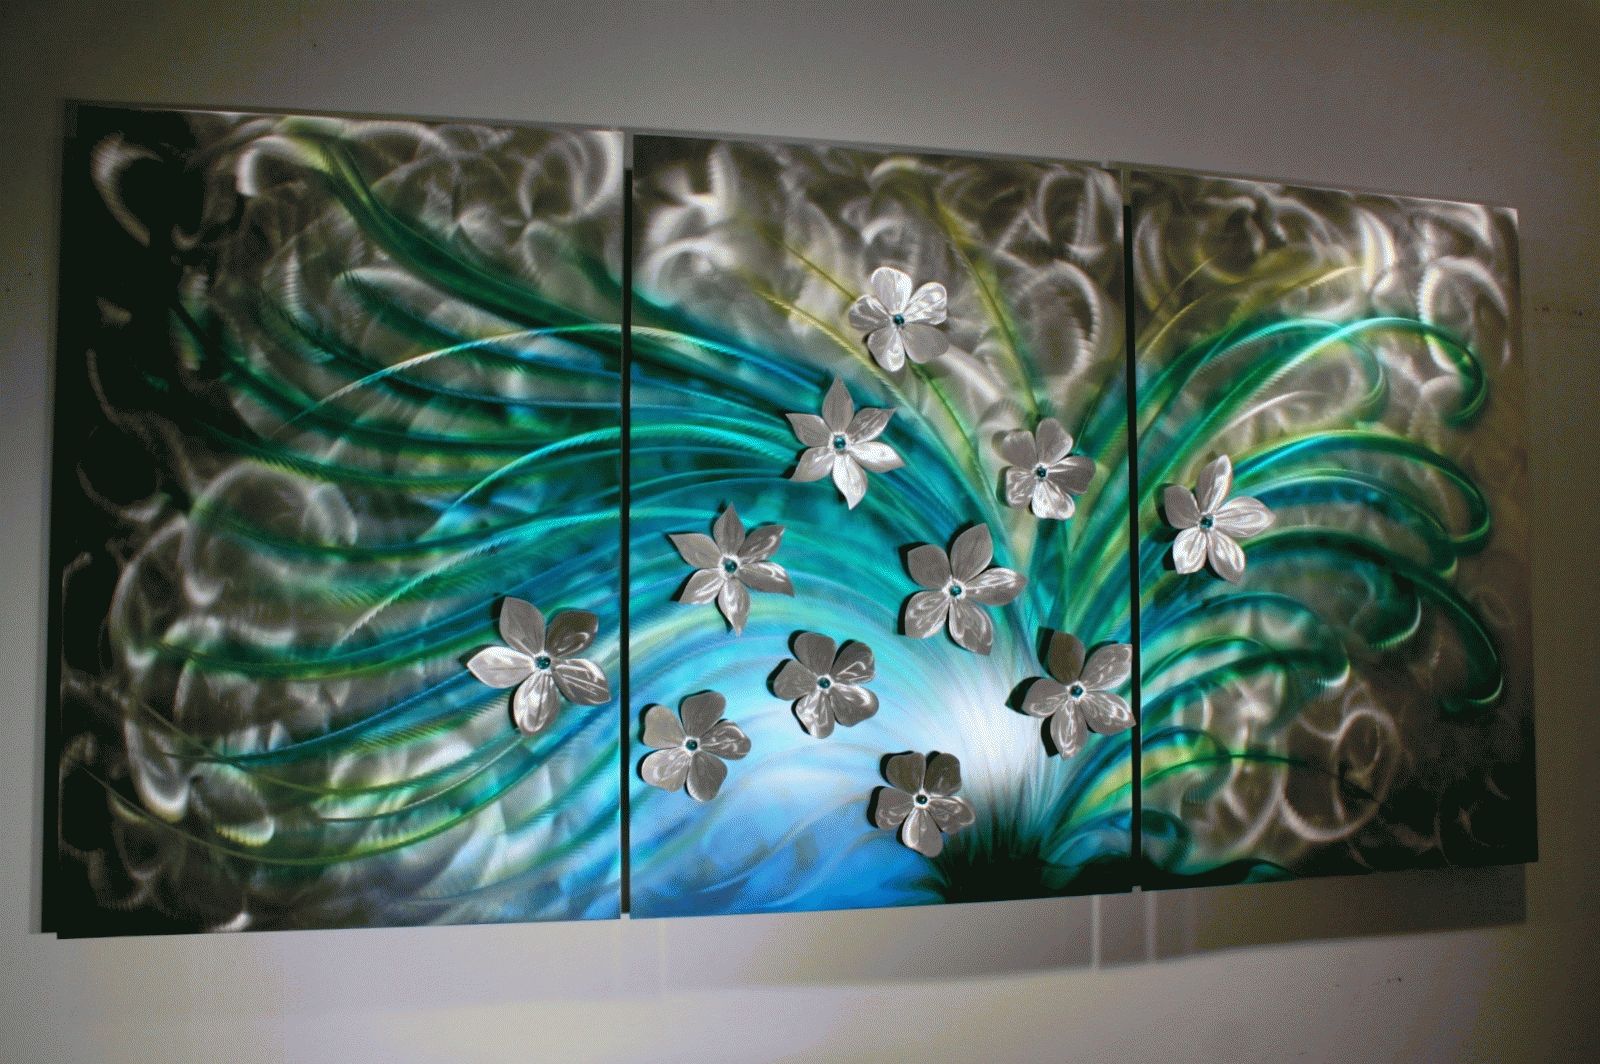 Floral Art, Metal Wall Sculpture, Abstract Home Decor Painting Pertaining To Most Recent Painting Metal Wall Art (View 2 of 20)